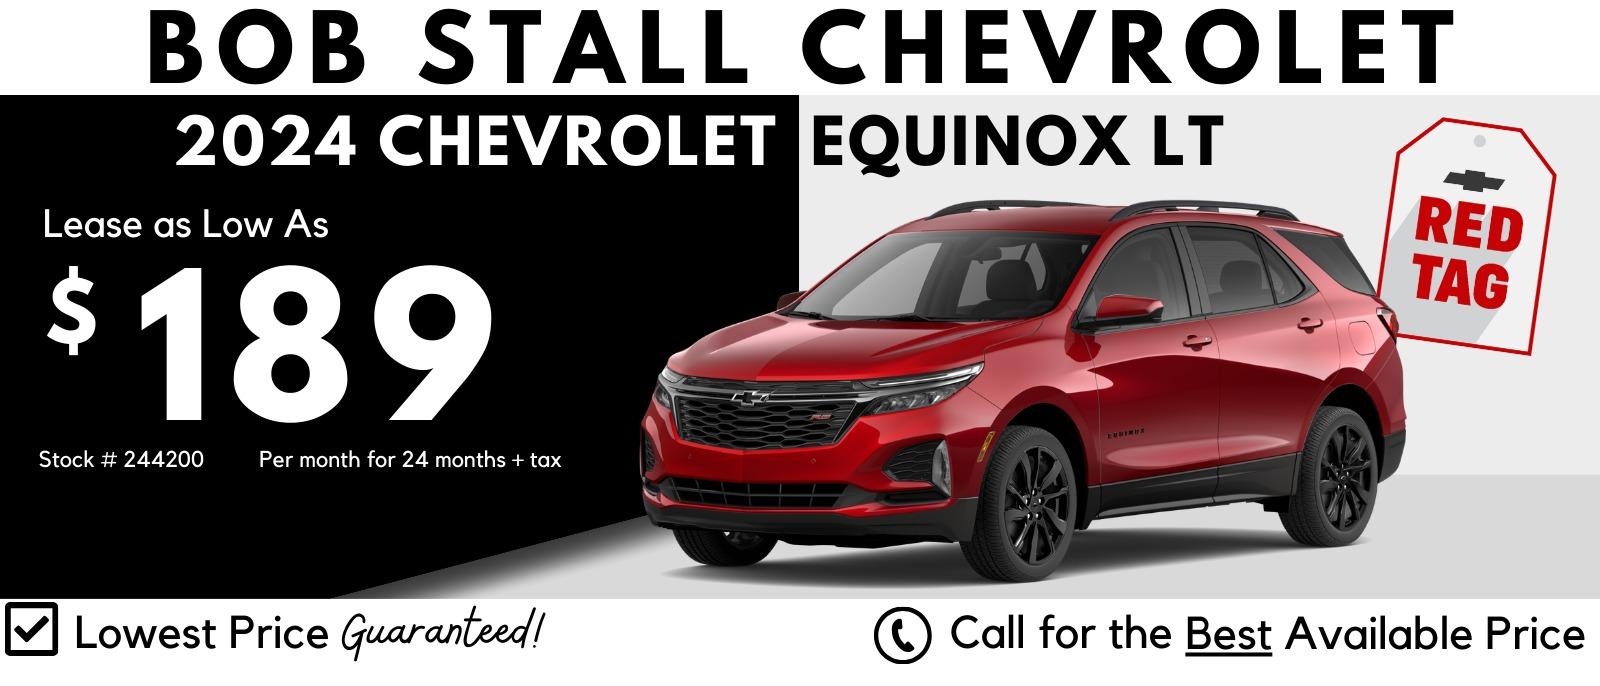 Equinox 2024  Savings - Lease as low as $189 per month for 24 Months